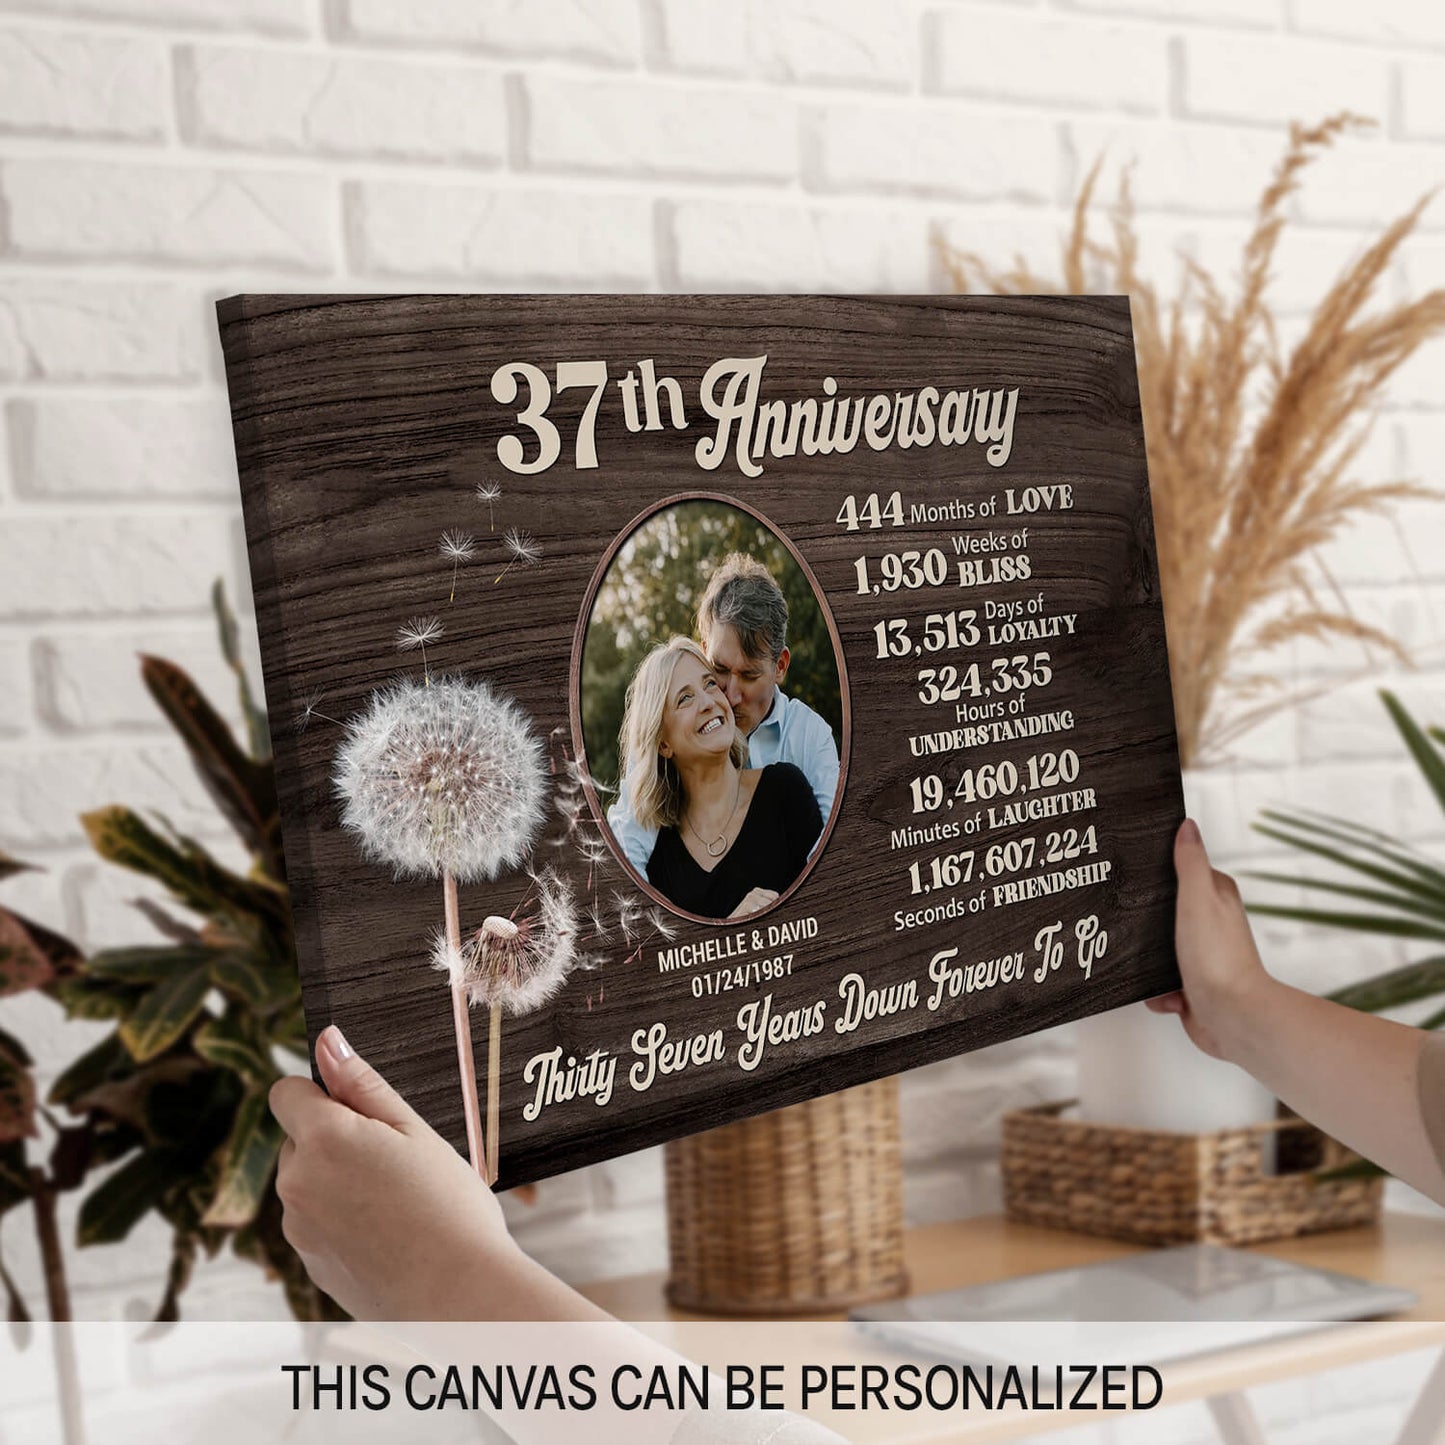 37th Anniversary - Personalized 37 Year Anniversary gift For Parents, Husband or Wife - Custom Canvas Print - MyMindfulGifts